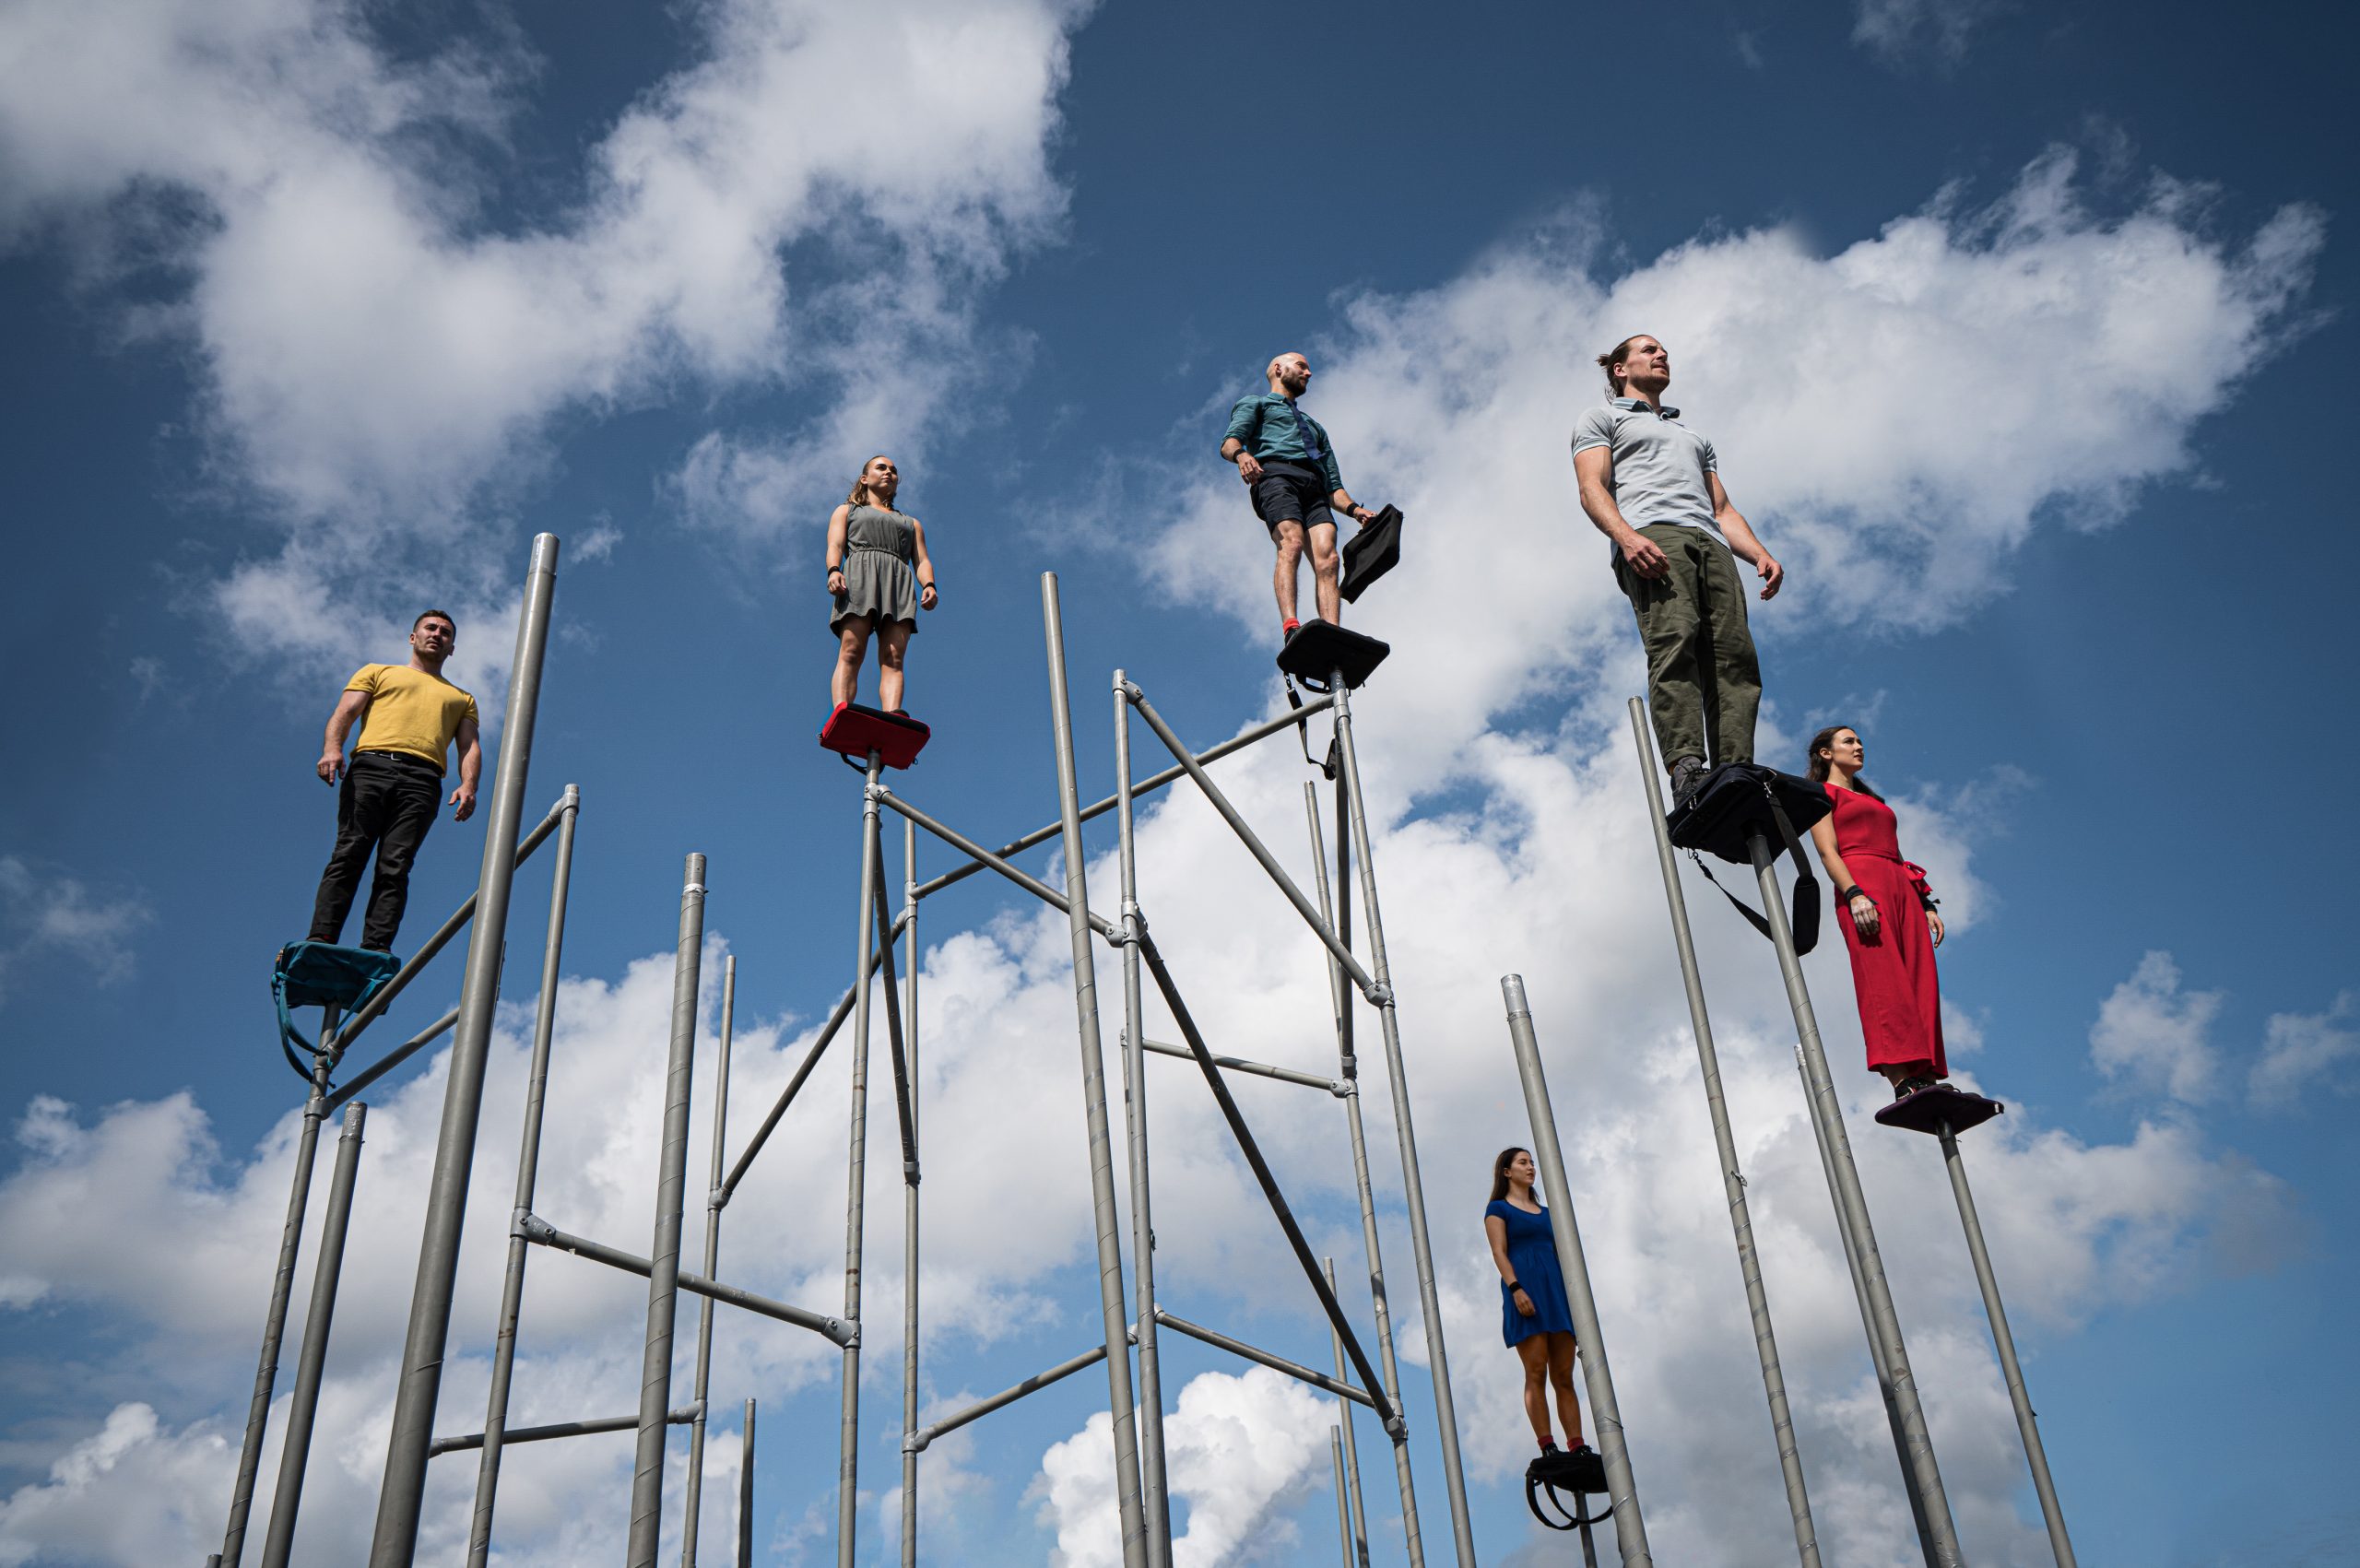 Image of people stood on top of large poles with a blue sky in the background